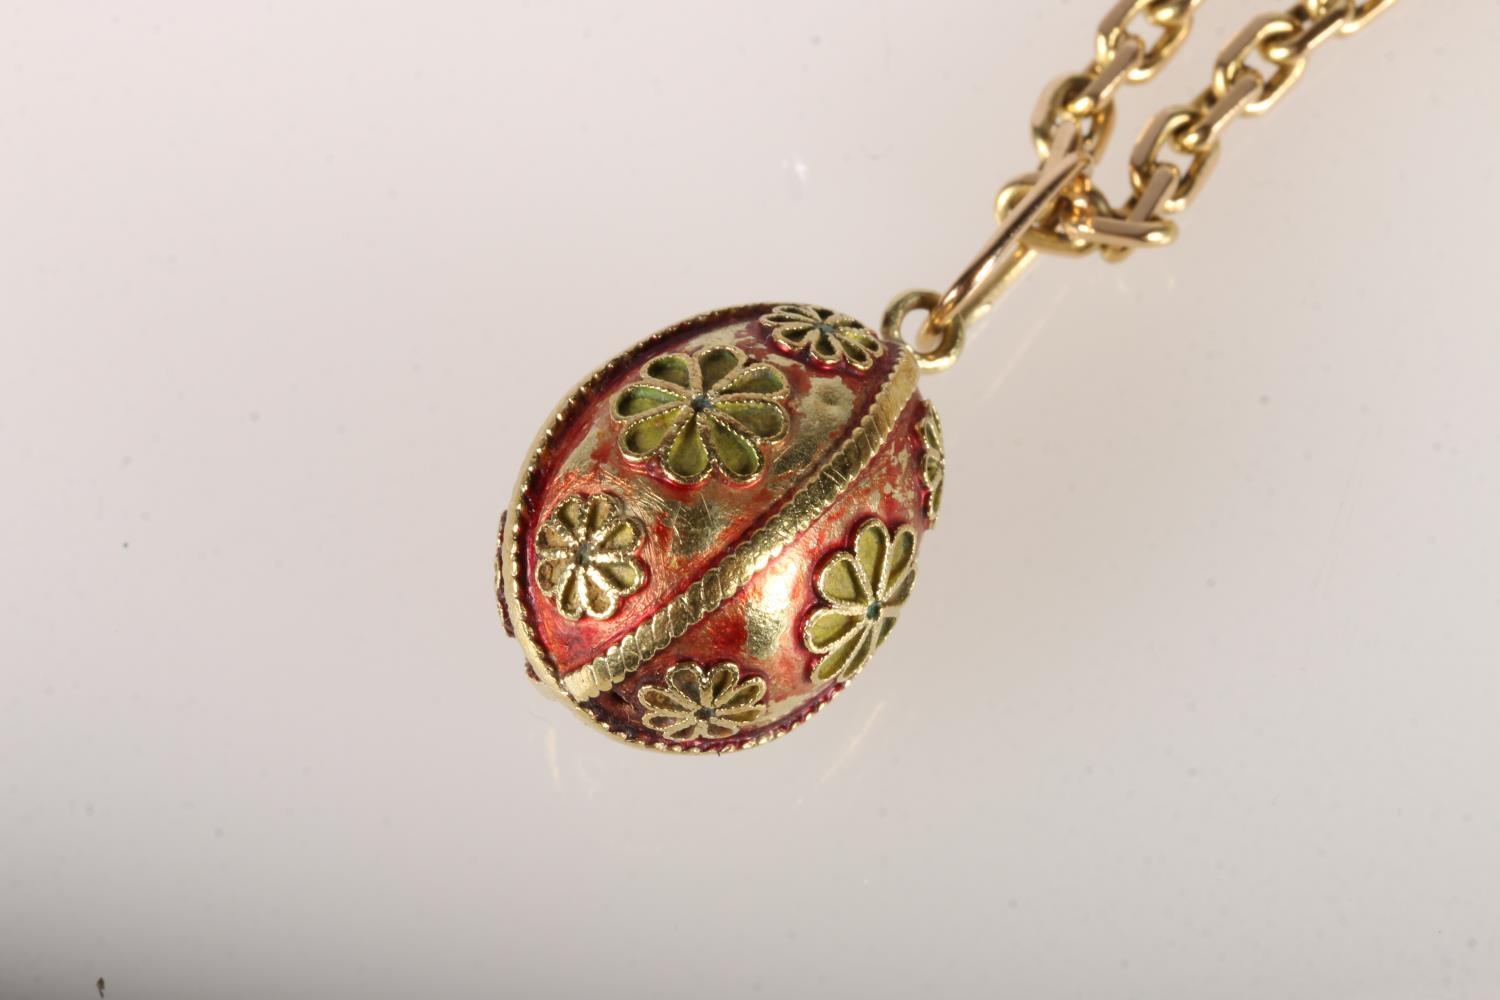 18ct gold chain link necklace with egg shaped pendant, 40cm, 40g gross. - Image 2 of 2